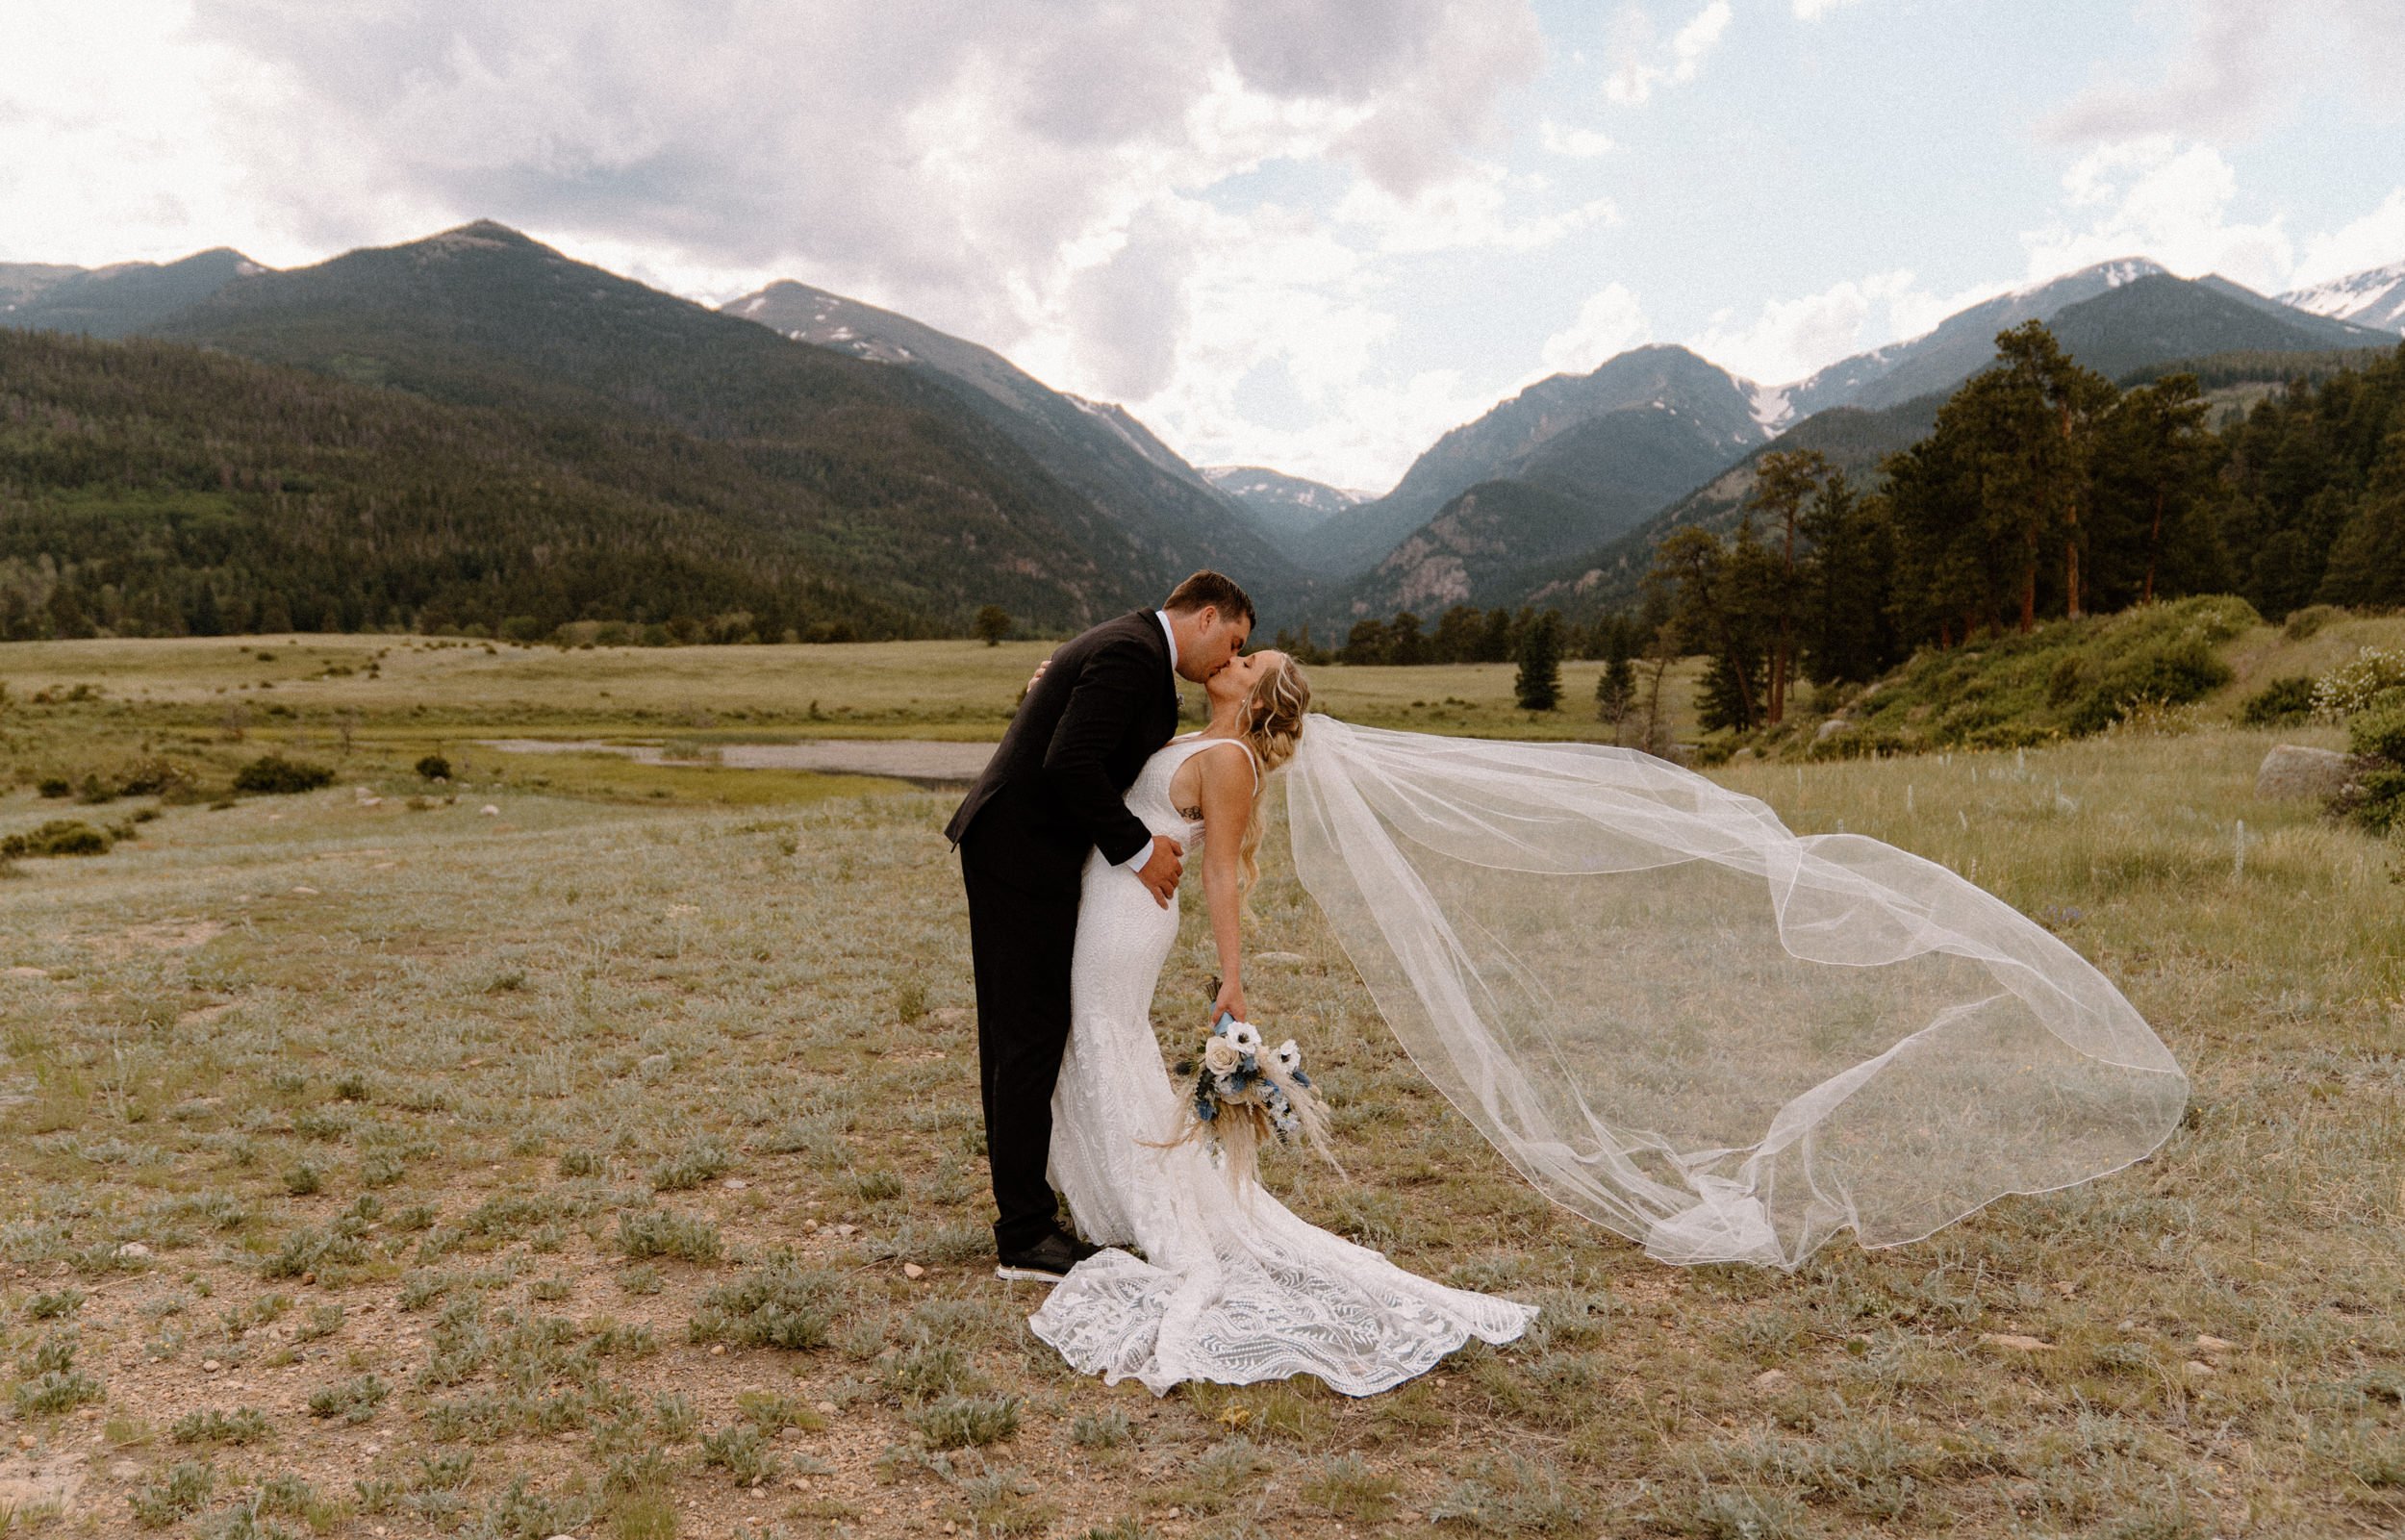 The bride and groom kiss in a mountain valley as her veil blows out behind her